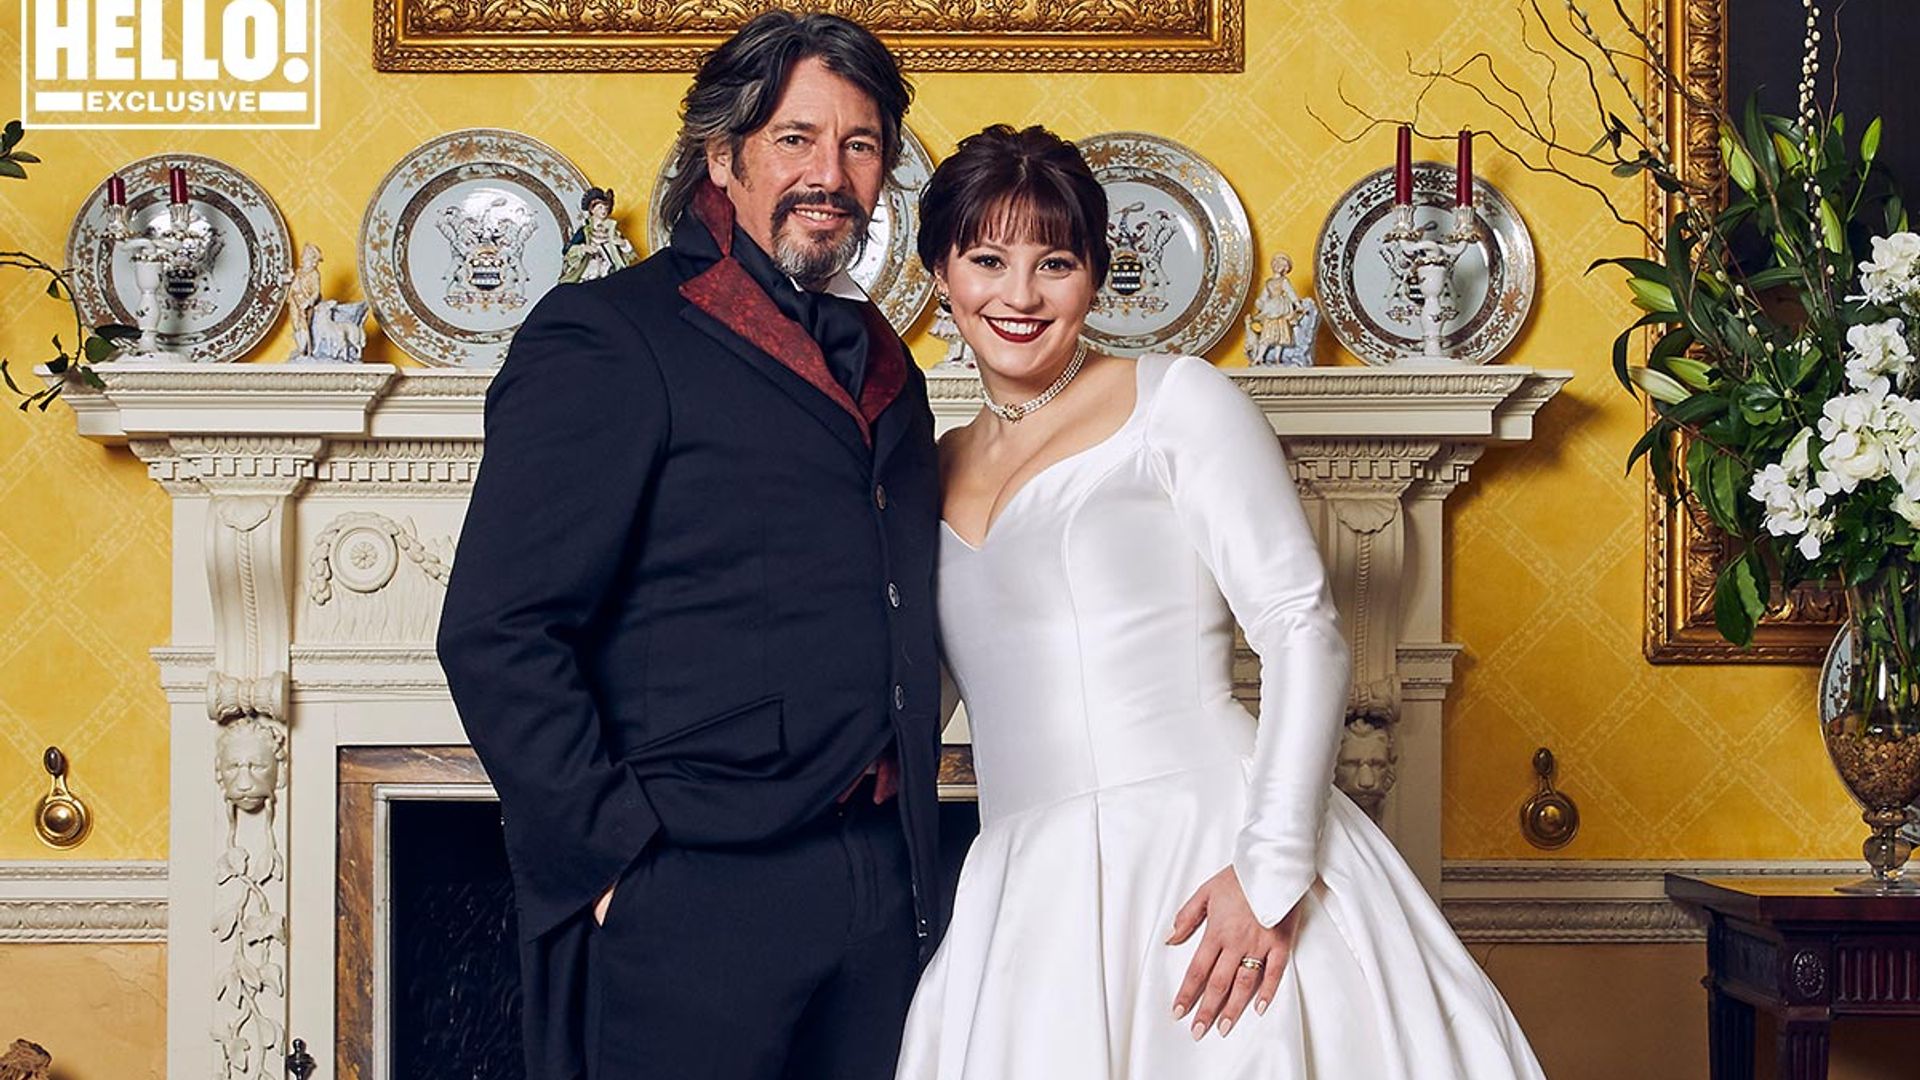 Laurence Llewelyn Bowen's daughter Hermione ties the knot - exclusive wedding photos